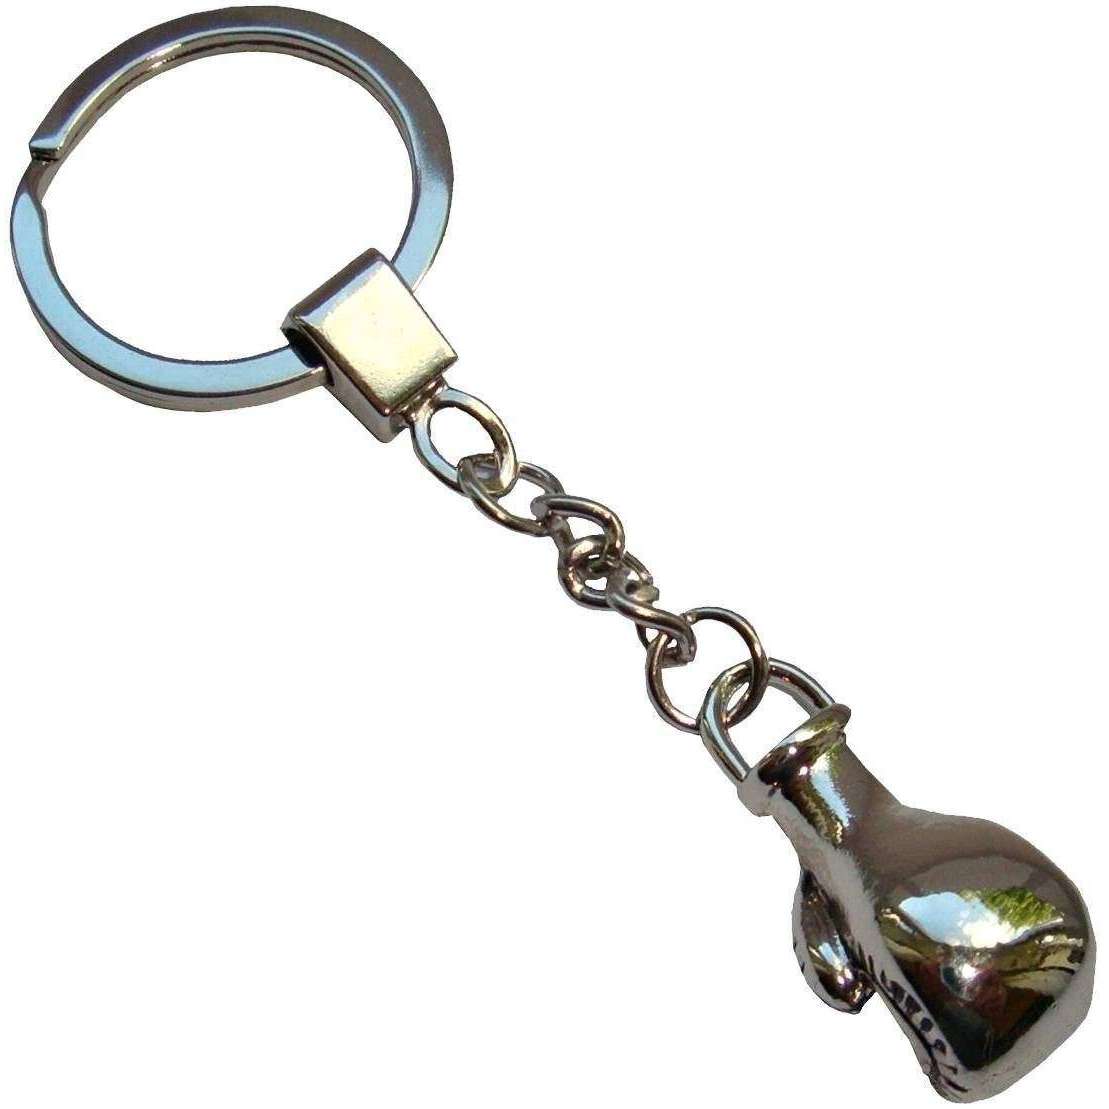 Bassin and Brown Boxing Glove Key Ring - Silver